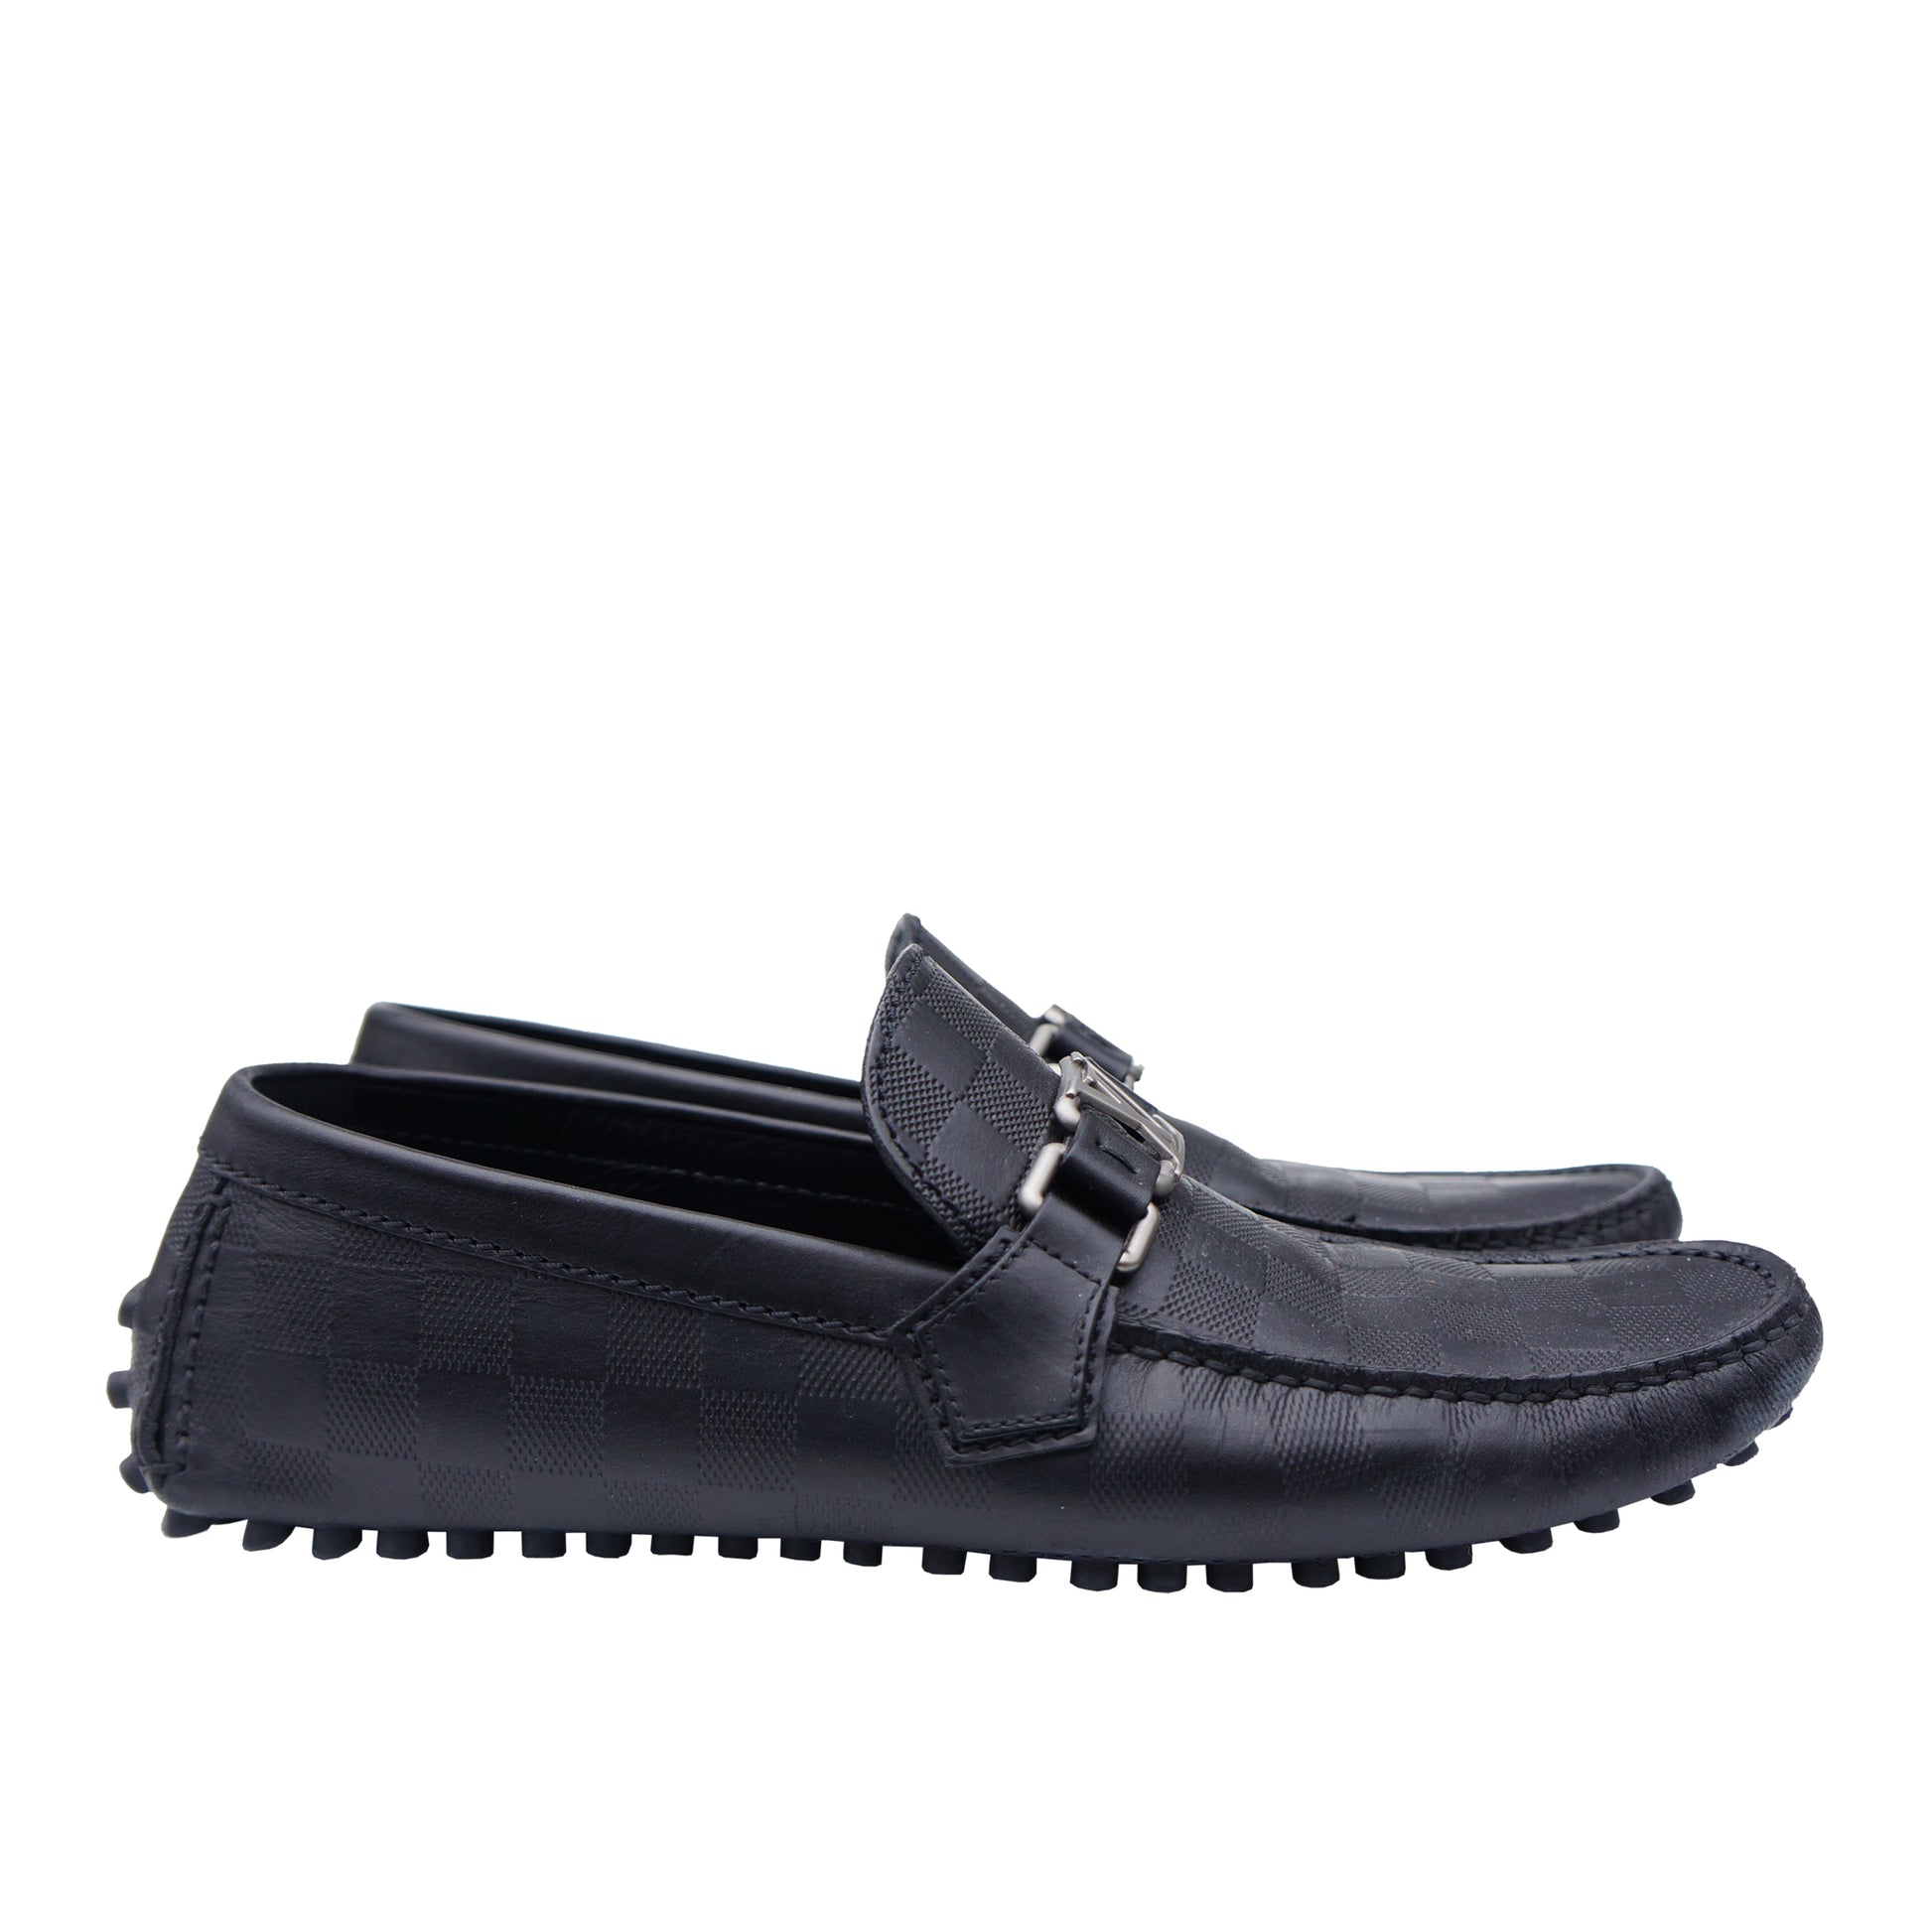 Hockenheim Moccasin - Luxury Loafers and Moccasins - Shoes, Men 1AAN4N